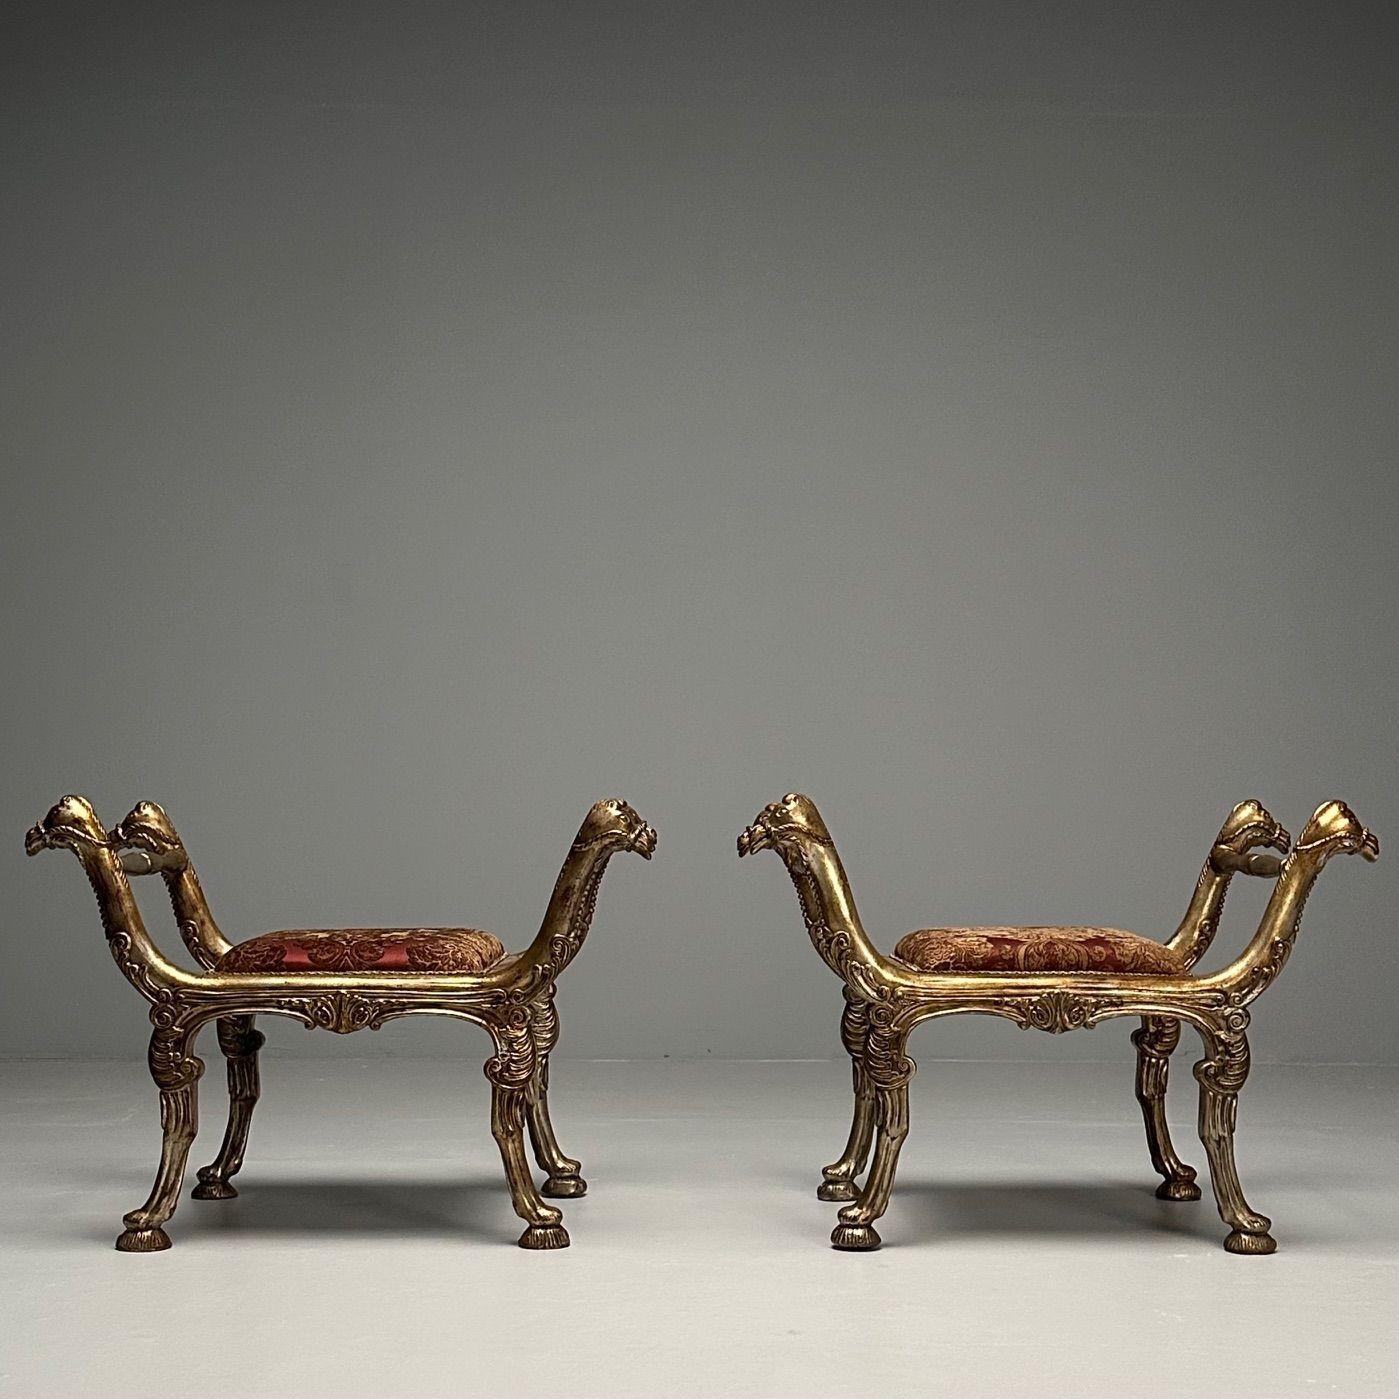 20th Century Italian Neoclassical Style, Curule Benches, Giltwood, Fabric, Camel Motif, 1970s For Sale